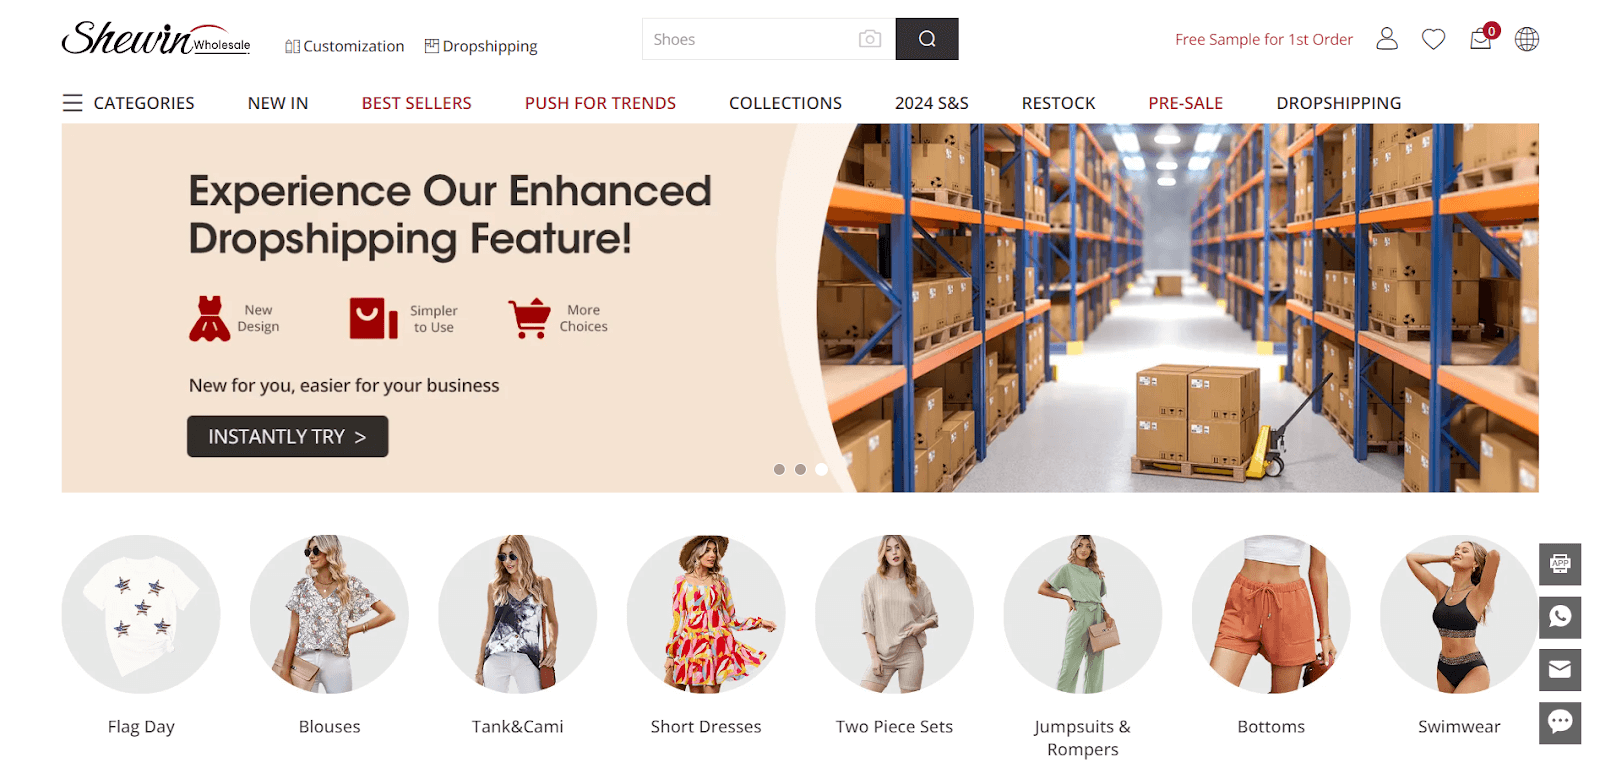 5 Top-Rated eCommerce Suppliers to Do Business With & Grow